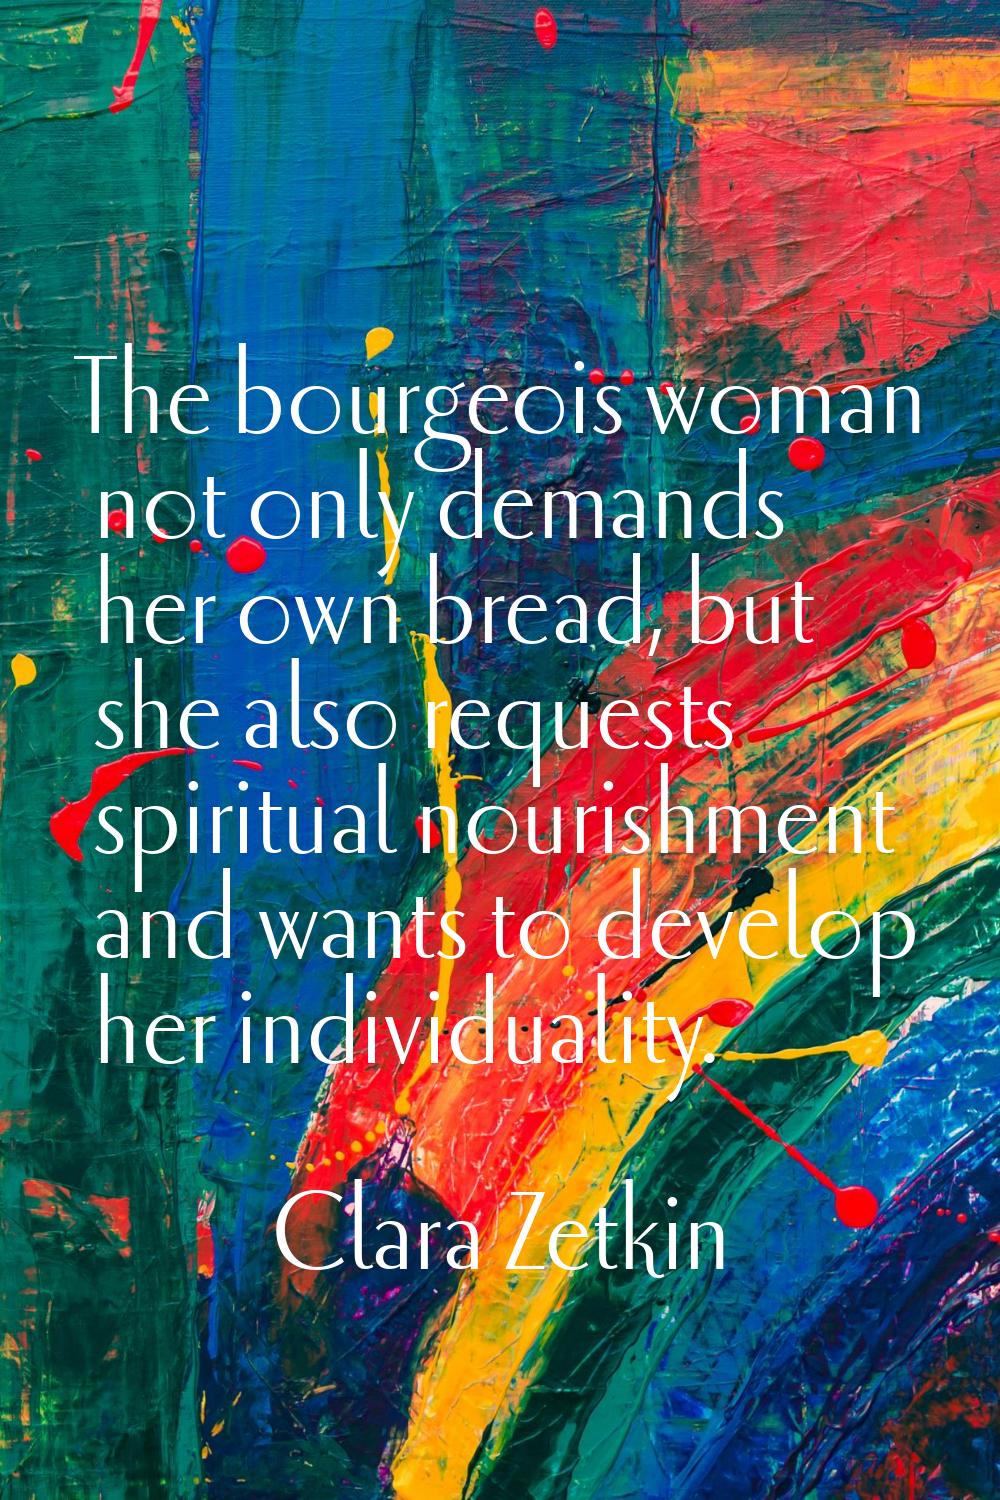 The bourgeois woman not only demands her own bread, but she also requests spiritual nourishment and